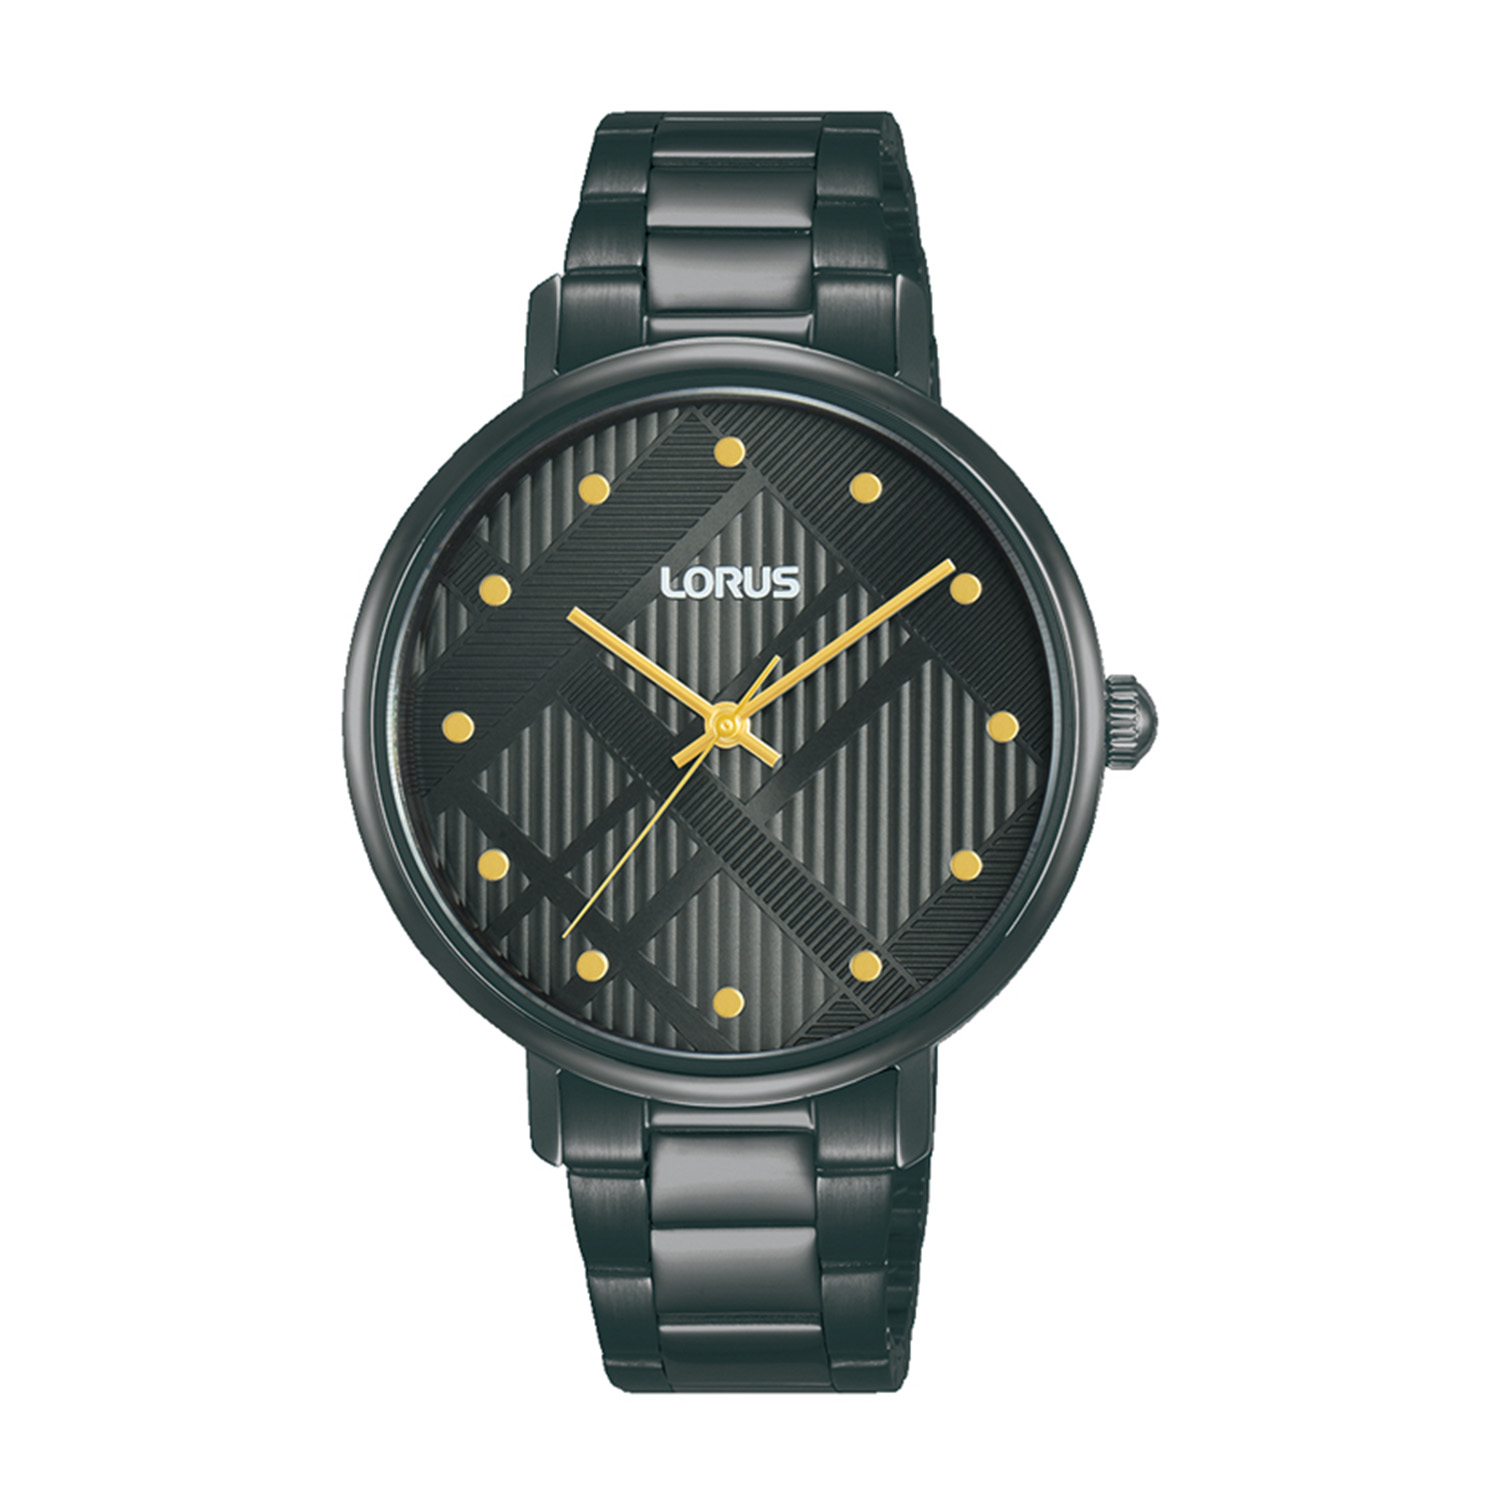 Womens watch LORUS in black stainless steel with black dial and bracelet.